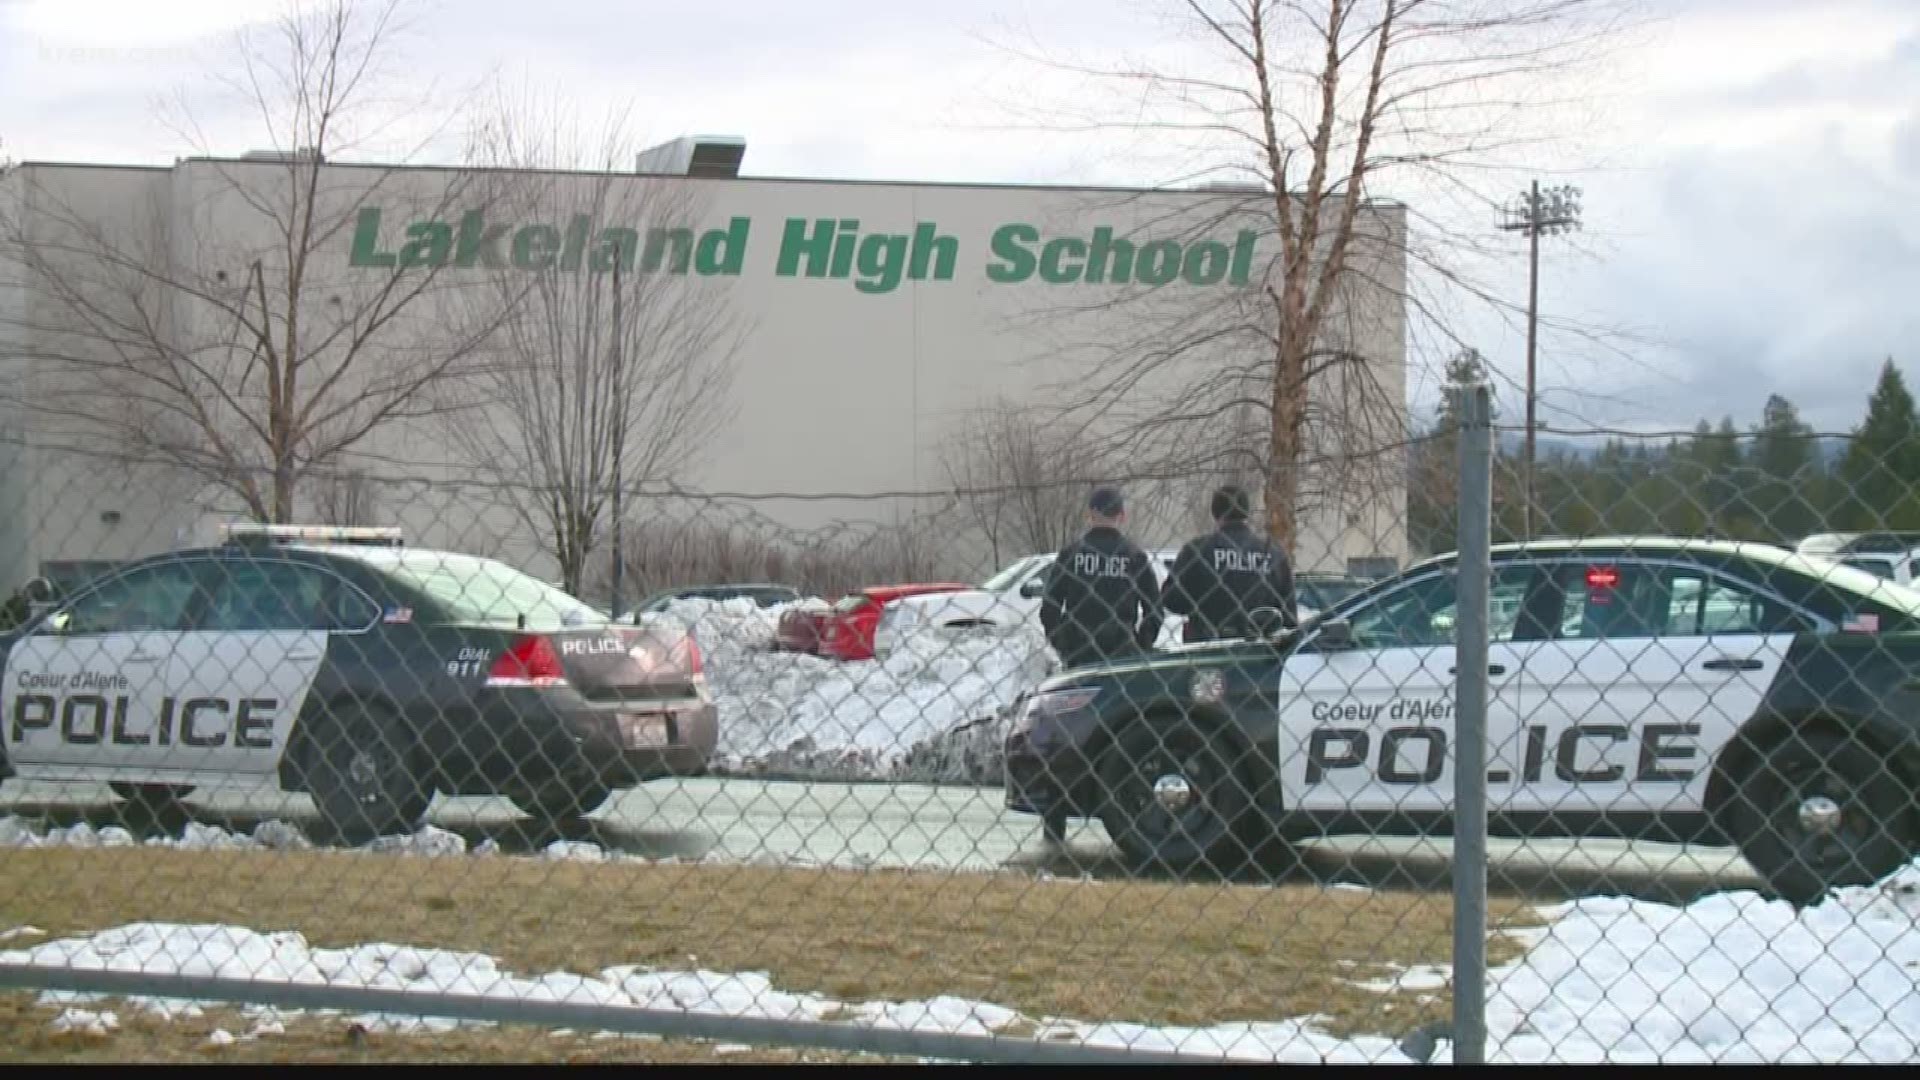 Law enforcement checked the campus in Rathdrum for safety concerns but no threat was found.